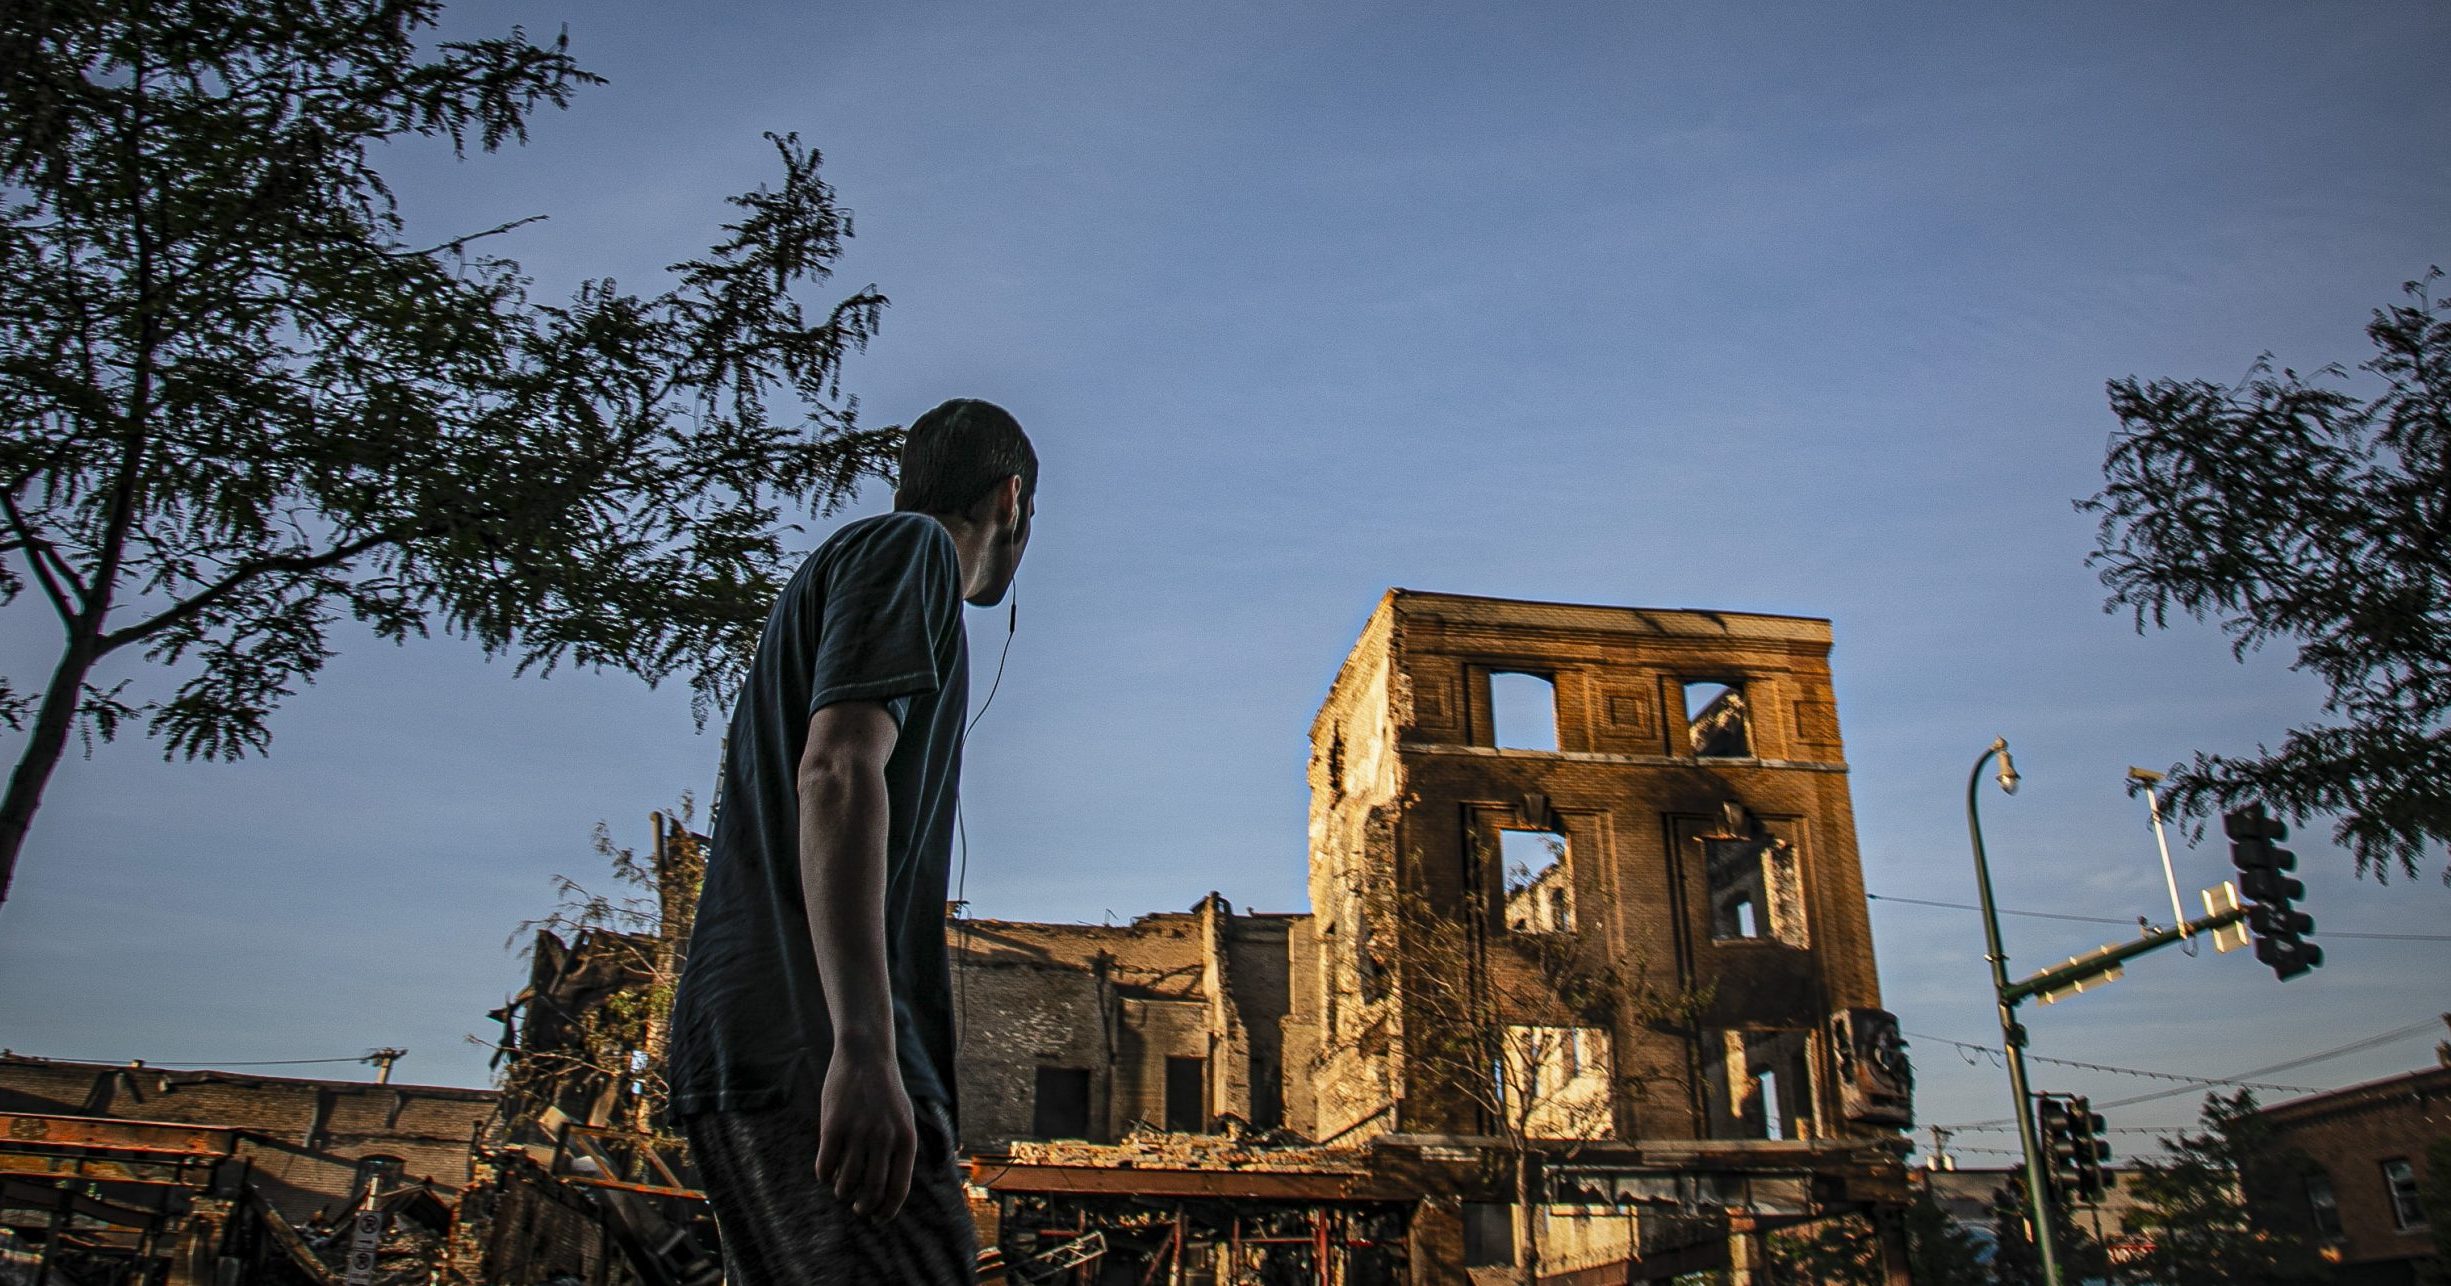 A man walks on Lake Street while looking at businesses destroyed during riots over the death of George Floyd on Sunday May 31, 2020, in Minneapolis. Floyd died after being restrained by Minneapolis police officers on May 25.